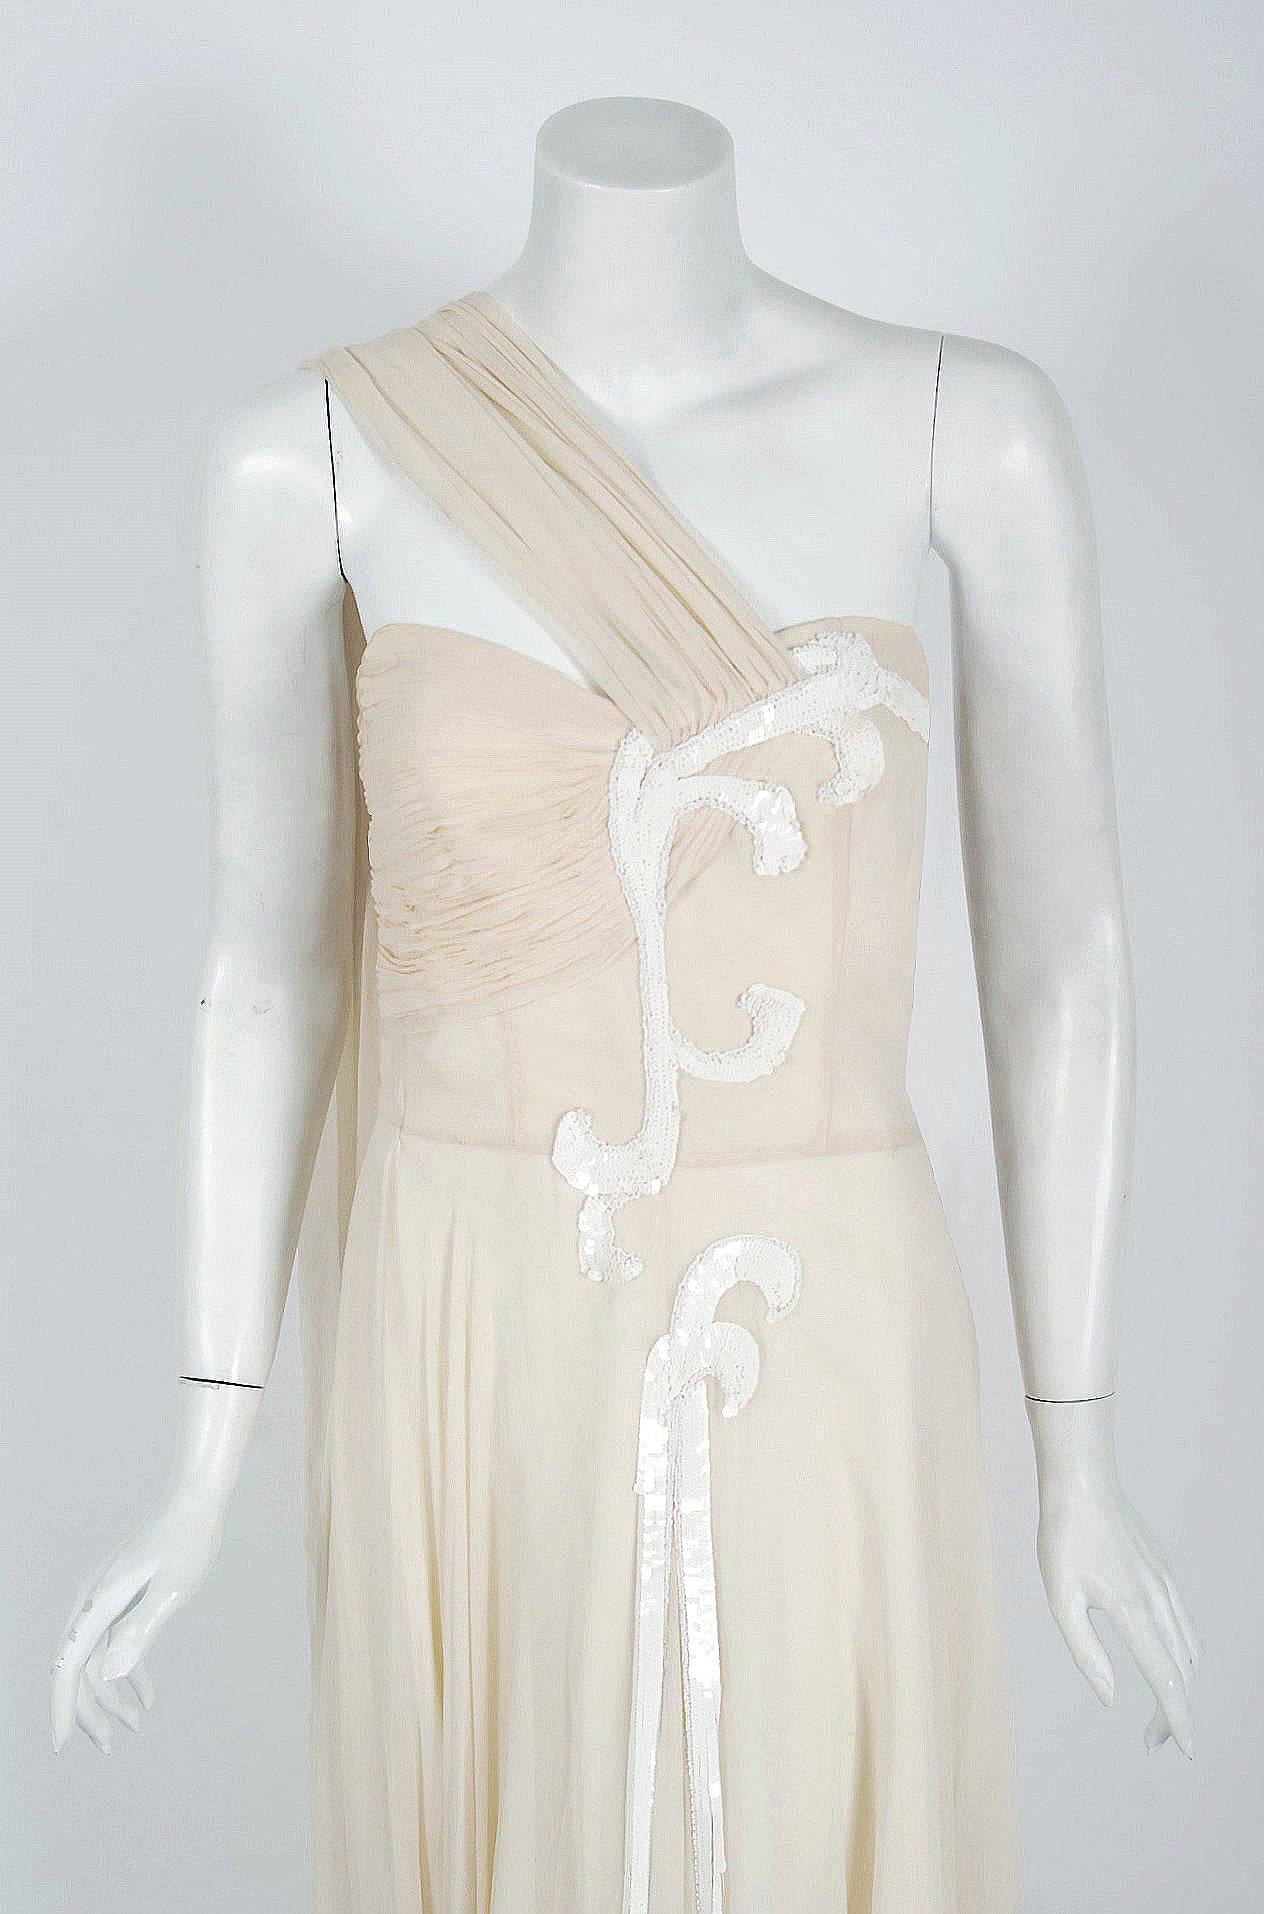 Ethereal late 1940's Saks Fifth Avenue creme goddess gown from the Old Hollywood era of glamour. This stunning silk-chiffon garment has so much couture detail, you can tell it was made with expert devotion. The boned sweetheart plunge bodice is